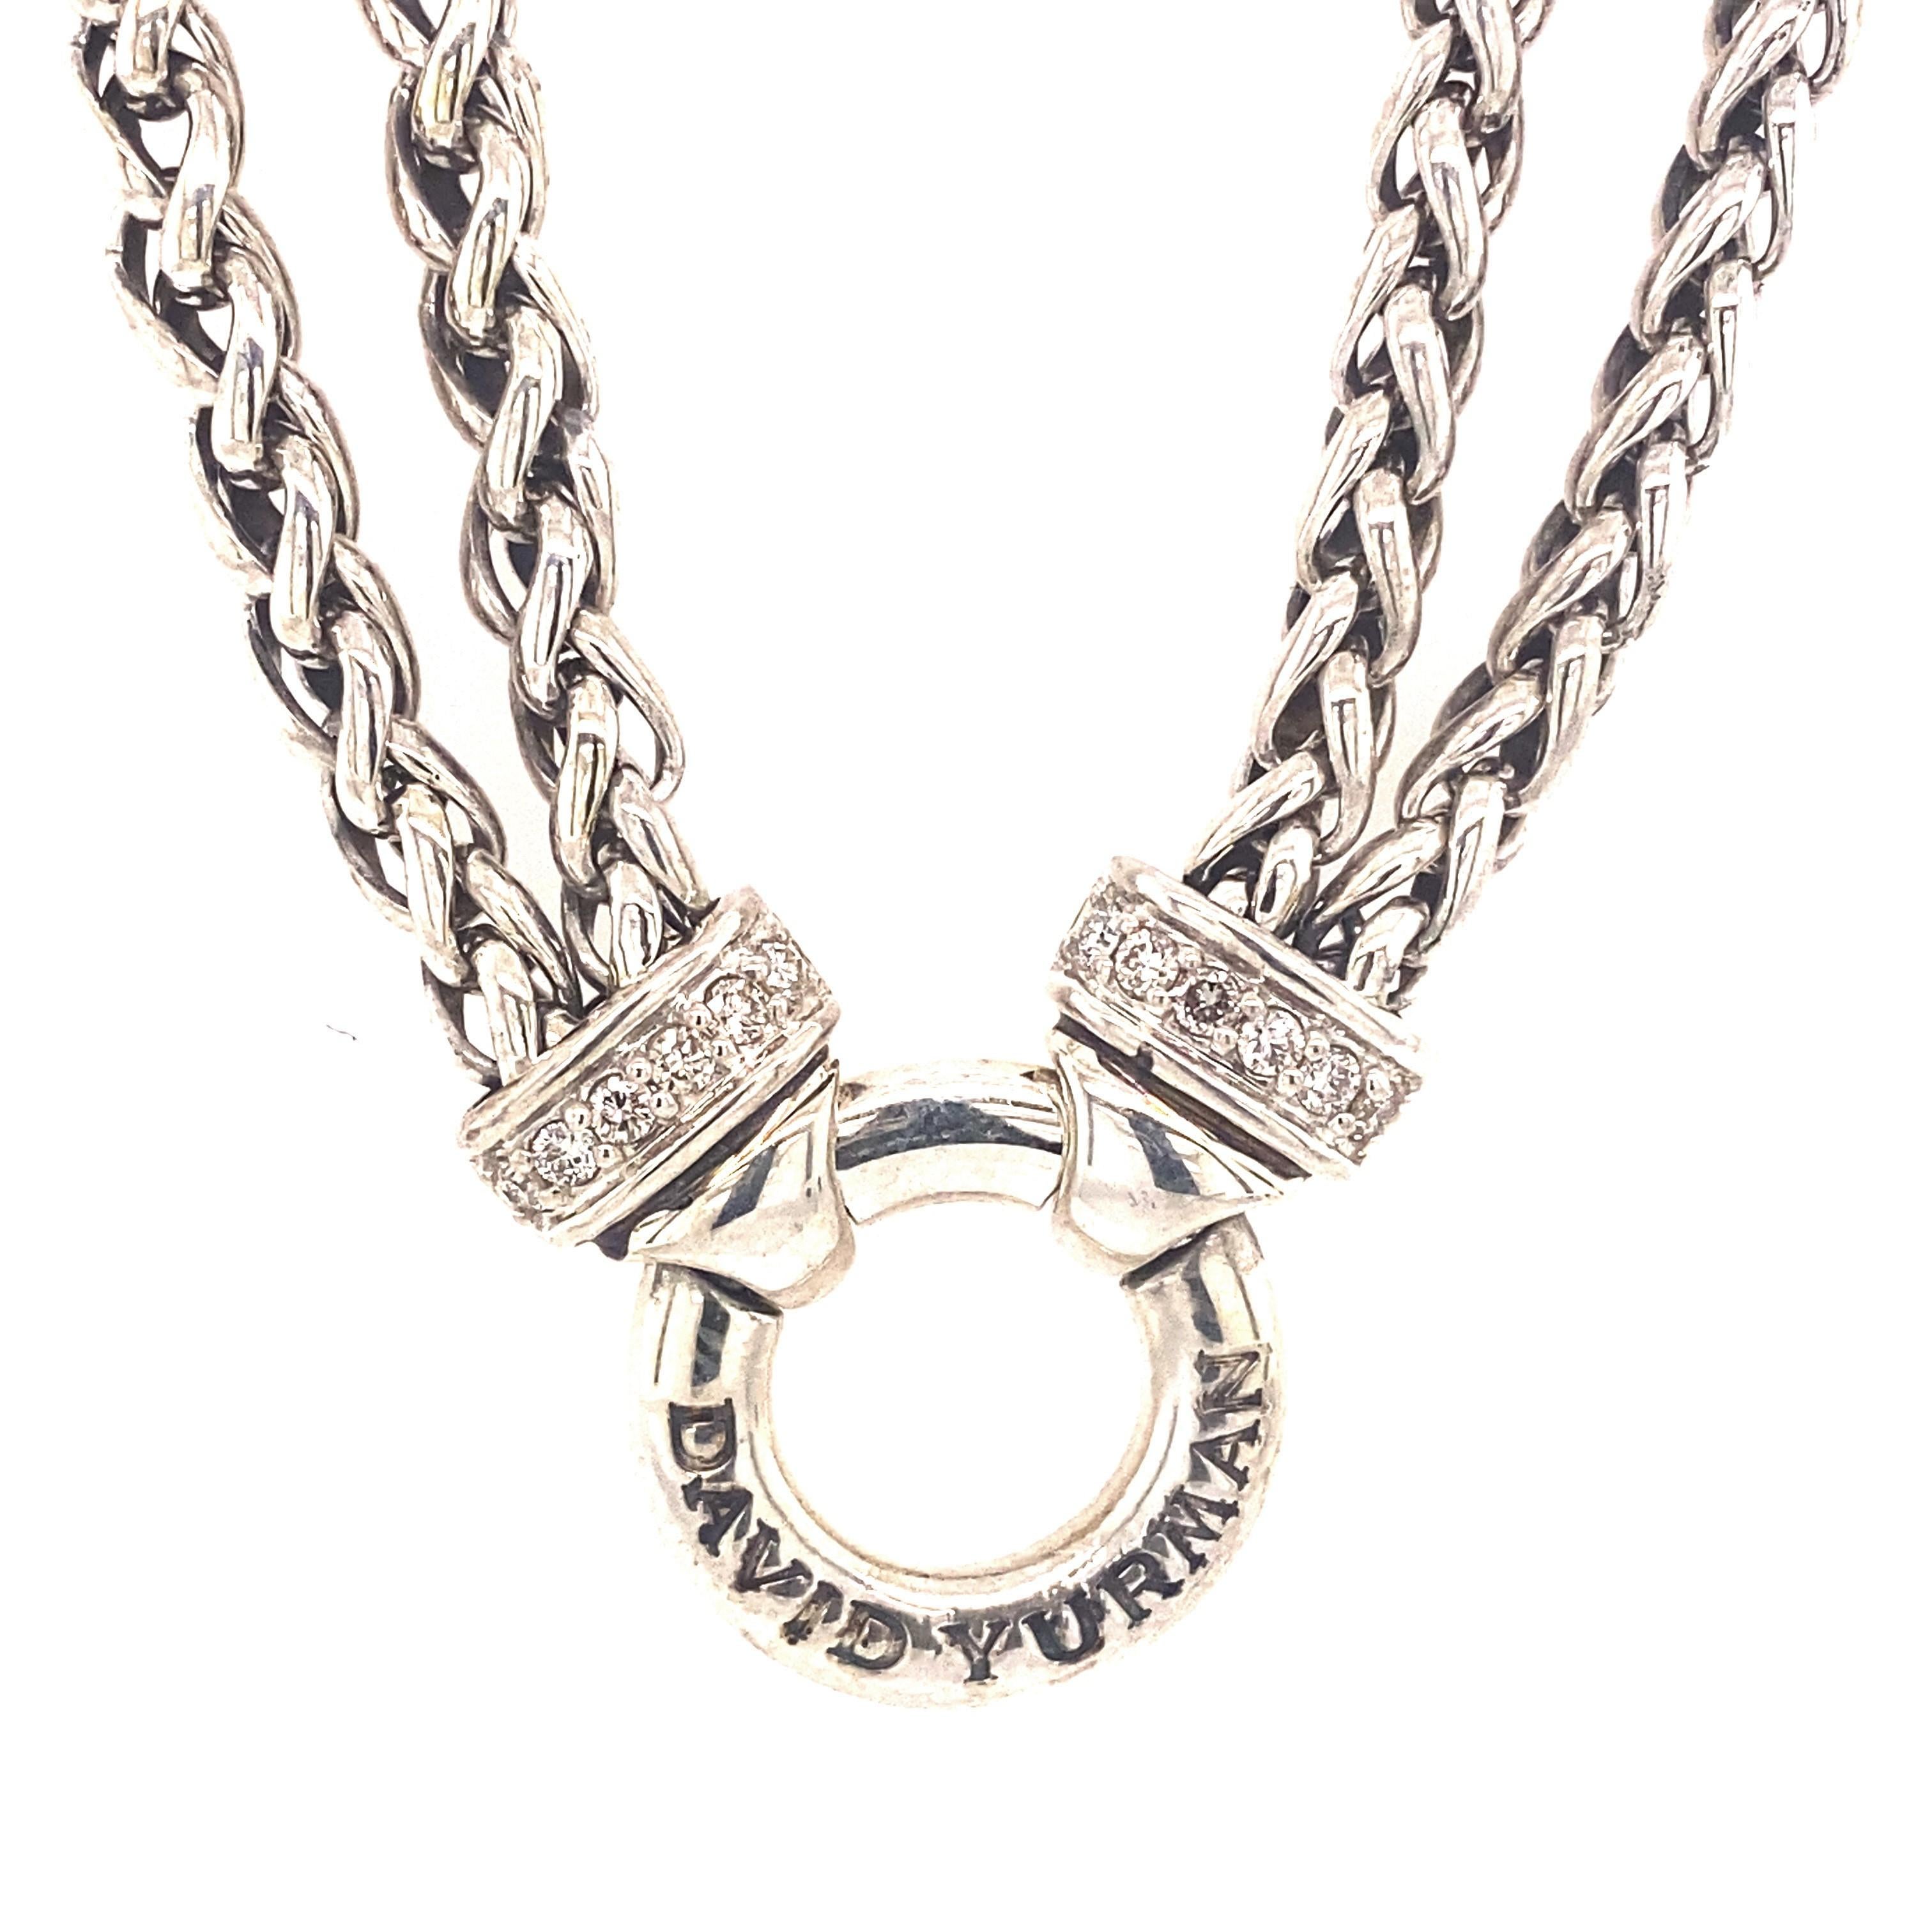 A classic necklace from David Yurman crafted from sterling silver and features two 4mm wheat chains that have .22ctw of pave diamonds and meet at the circle engraved with David Yurman. Pull clasp with classic cable motif. The length is approximately